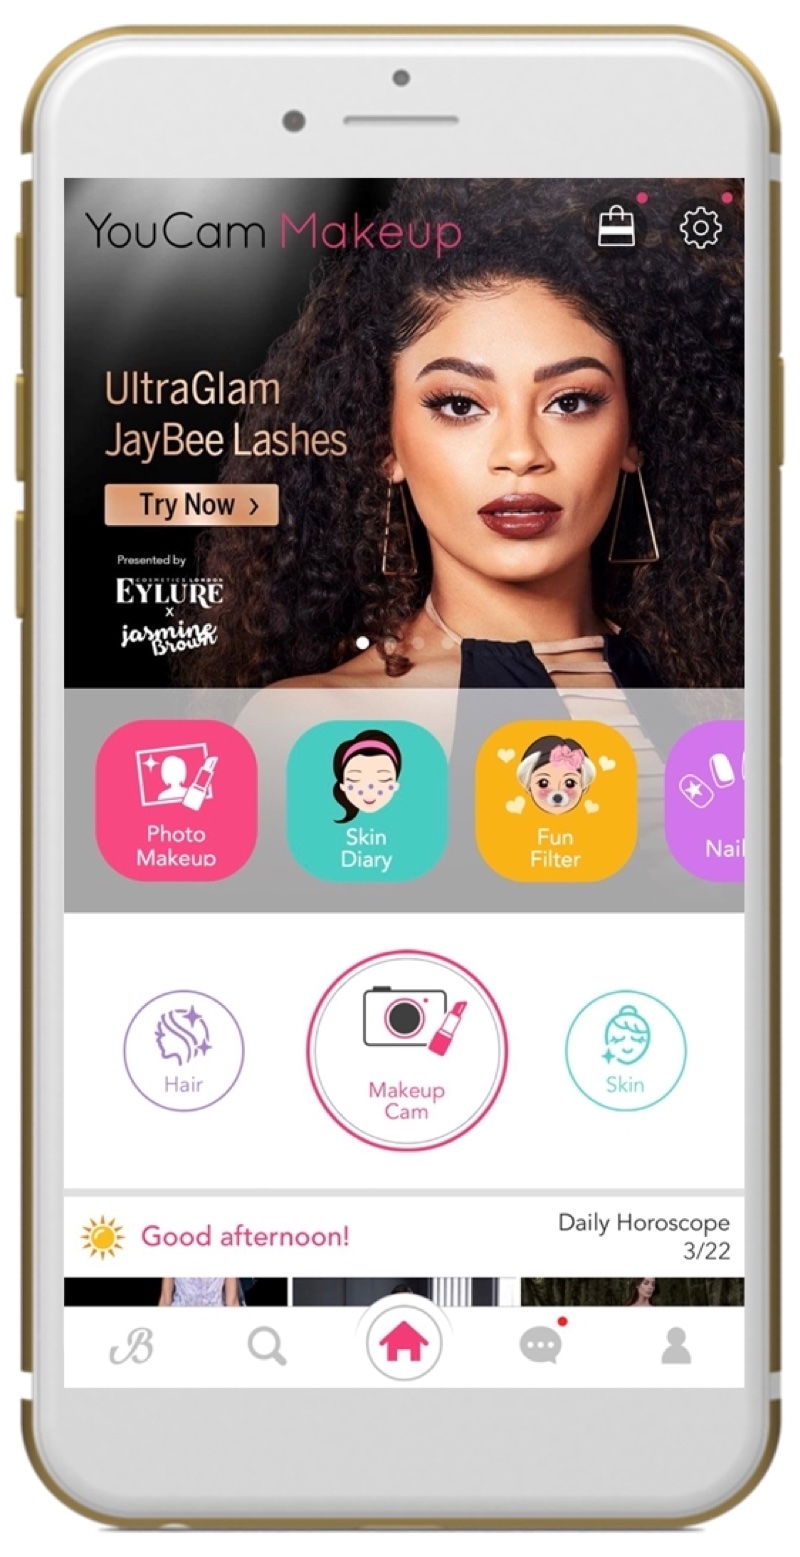 Eylure collaborates with YouCam Makeup to create AR try-on app